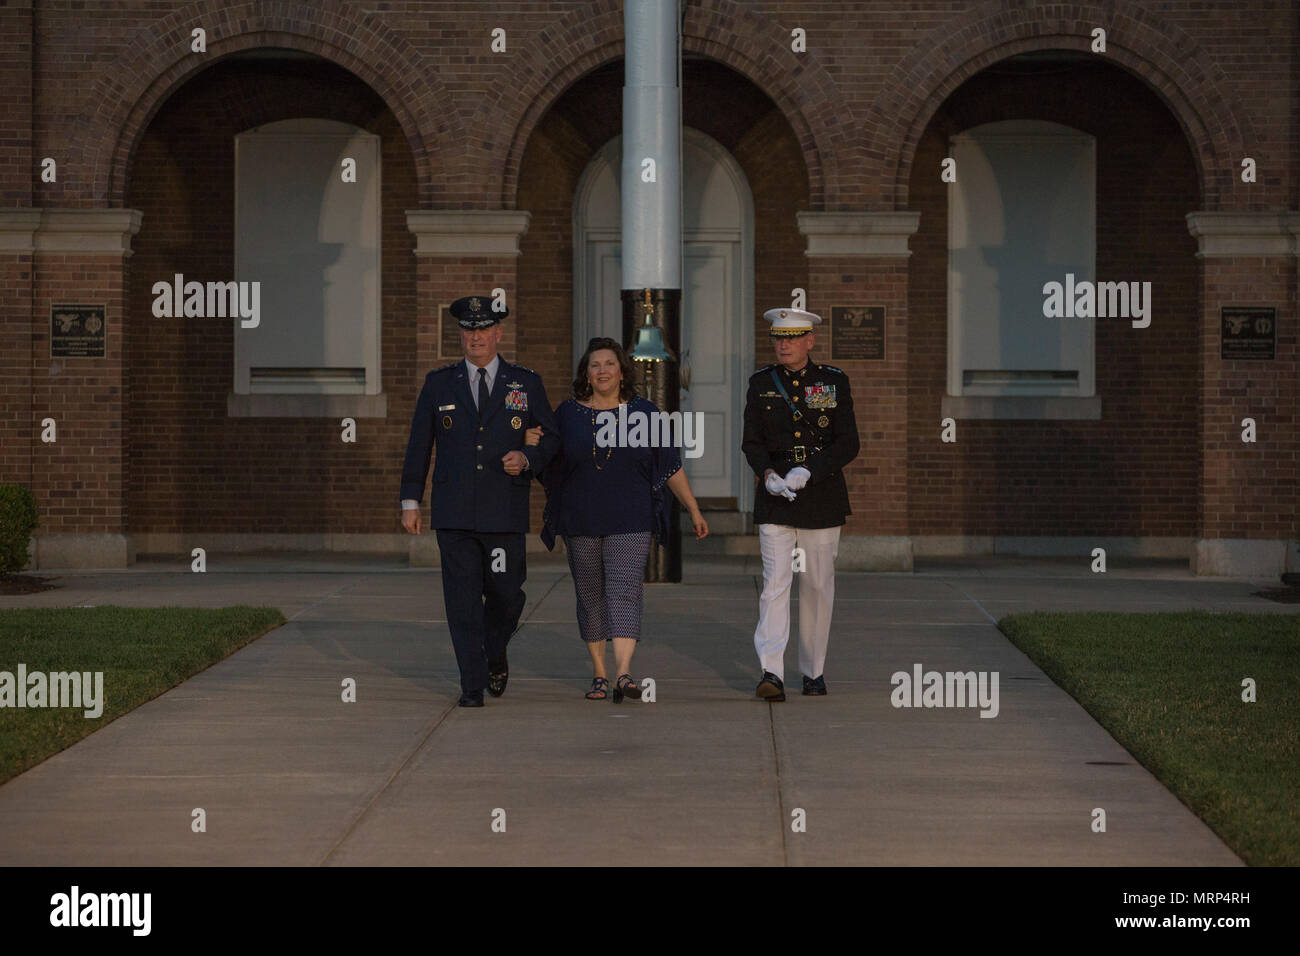 U.S. Air Force Lt. Gen. Thomas J. Trask, vice commander of Headquarters U.S. Special Operations Command (SOCOM), left, Barbara Trask, center, and Director Marine Corps Staff Lt. Gen. James B. Laster, right, walk down centerwalk prior to an evening parade at Marine Barracks Washington, Washington, D.C., June 23, 2017. Evening parades are held as a means of honoring senior officials, distinguished citizens and supporters of the Marine Corps. (U.S. Marine Corps photo by Lance Cpl. Stephon L. McRae) Stock Photo